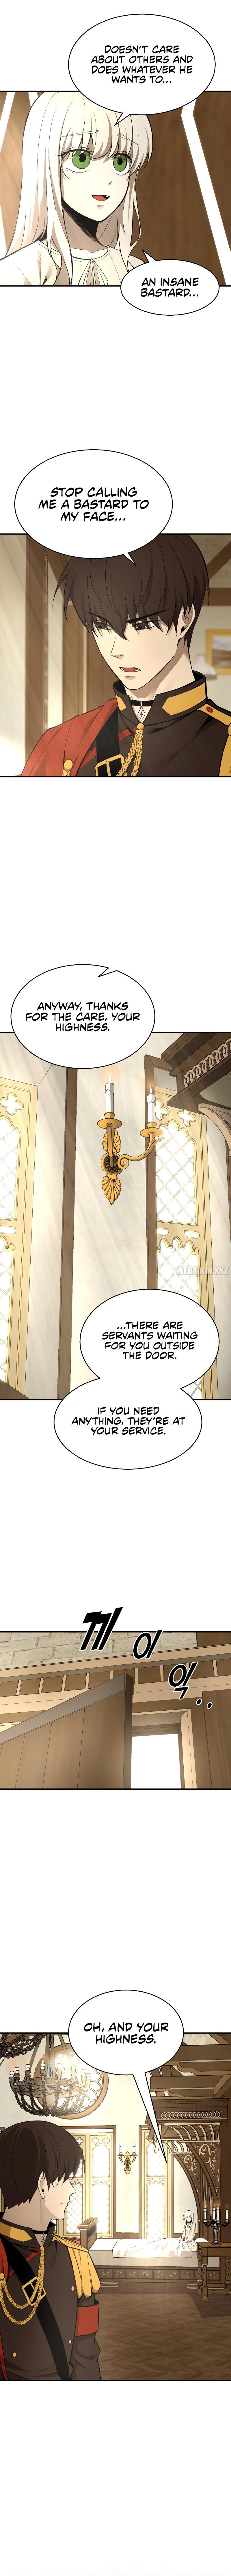 tyrant-of-the-tower-defense-game-chap-36-17